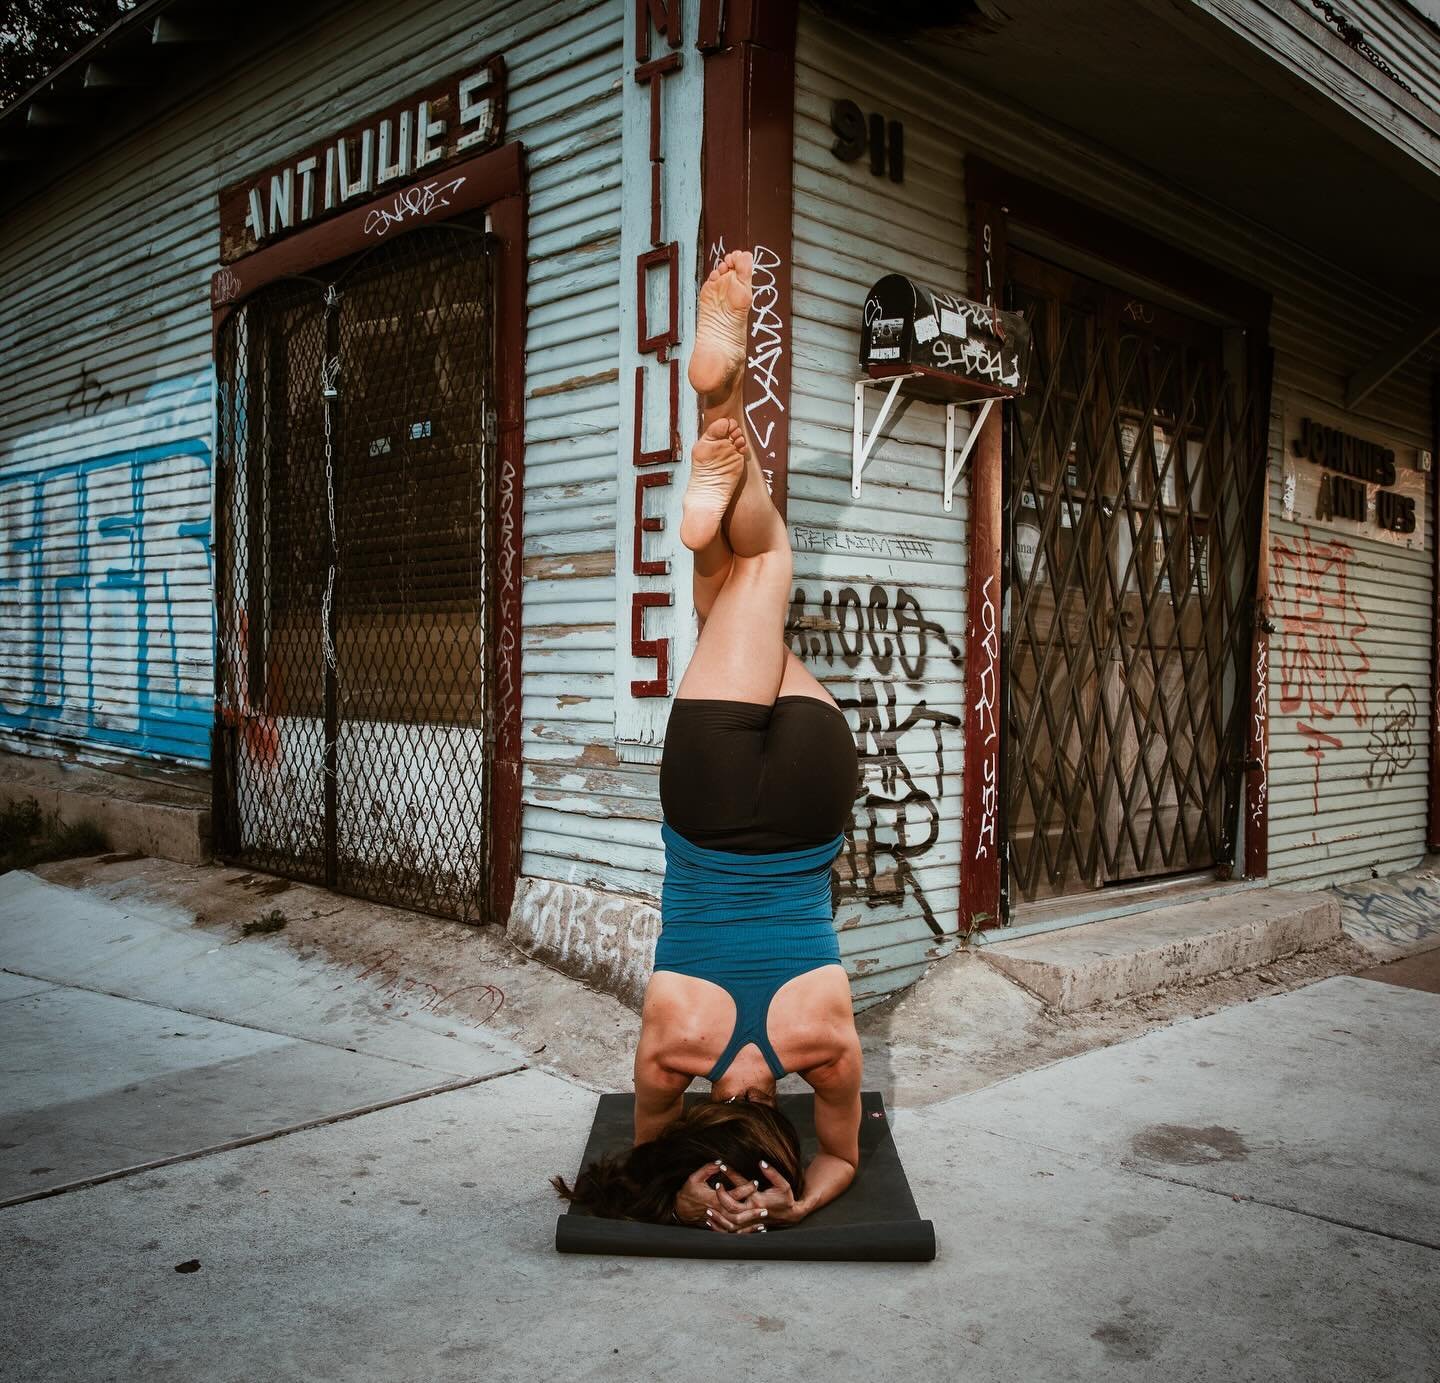 What&rsquo;s the Deal with Inversions and Arm Balancing?

Some of you may already be familiar with this, but it&rsquo;s worth mentioning: inversions and arm balances in yoga offer more than just cool poses. They bring actual benefits!

Health Benefit